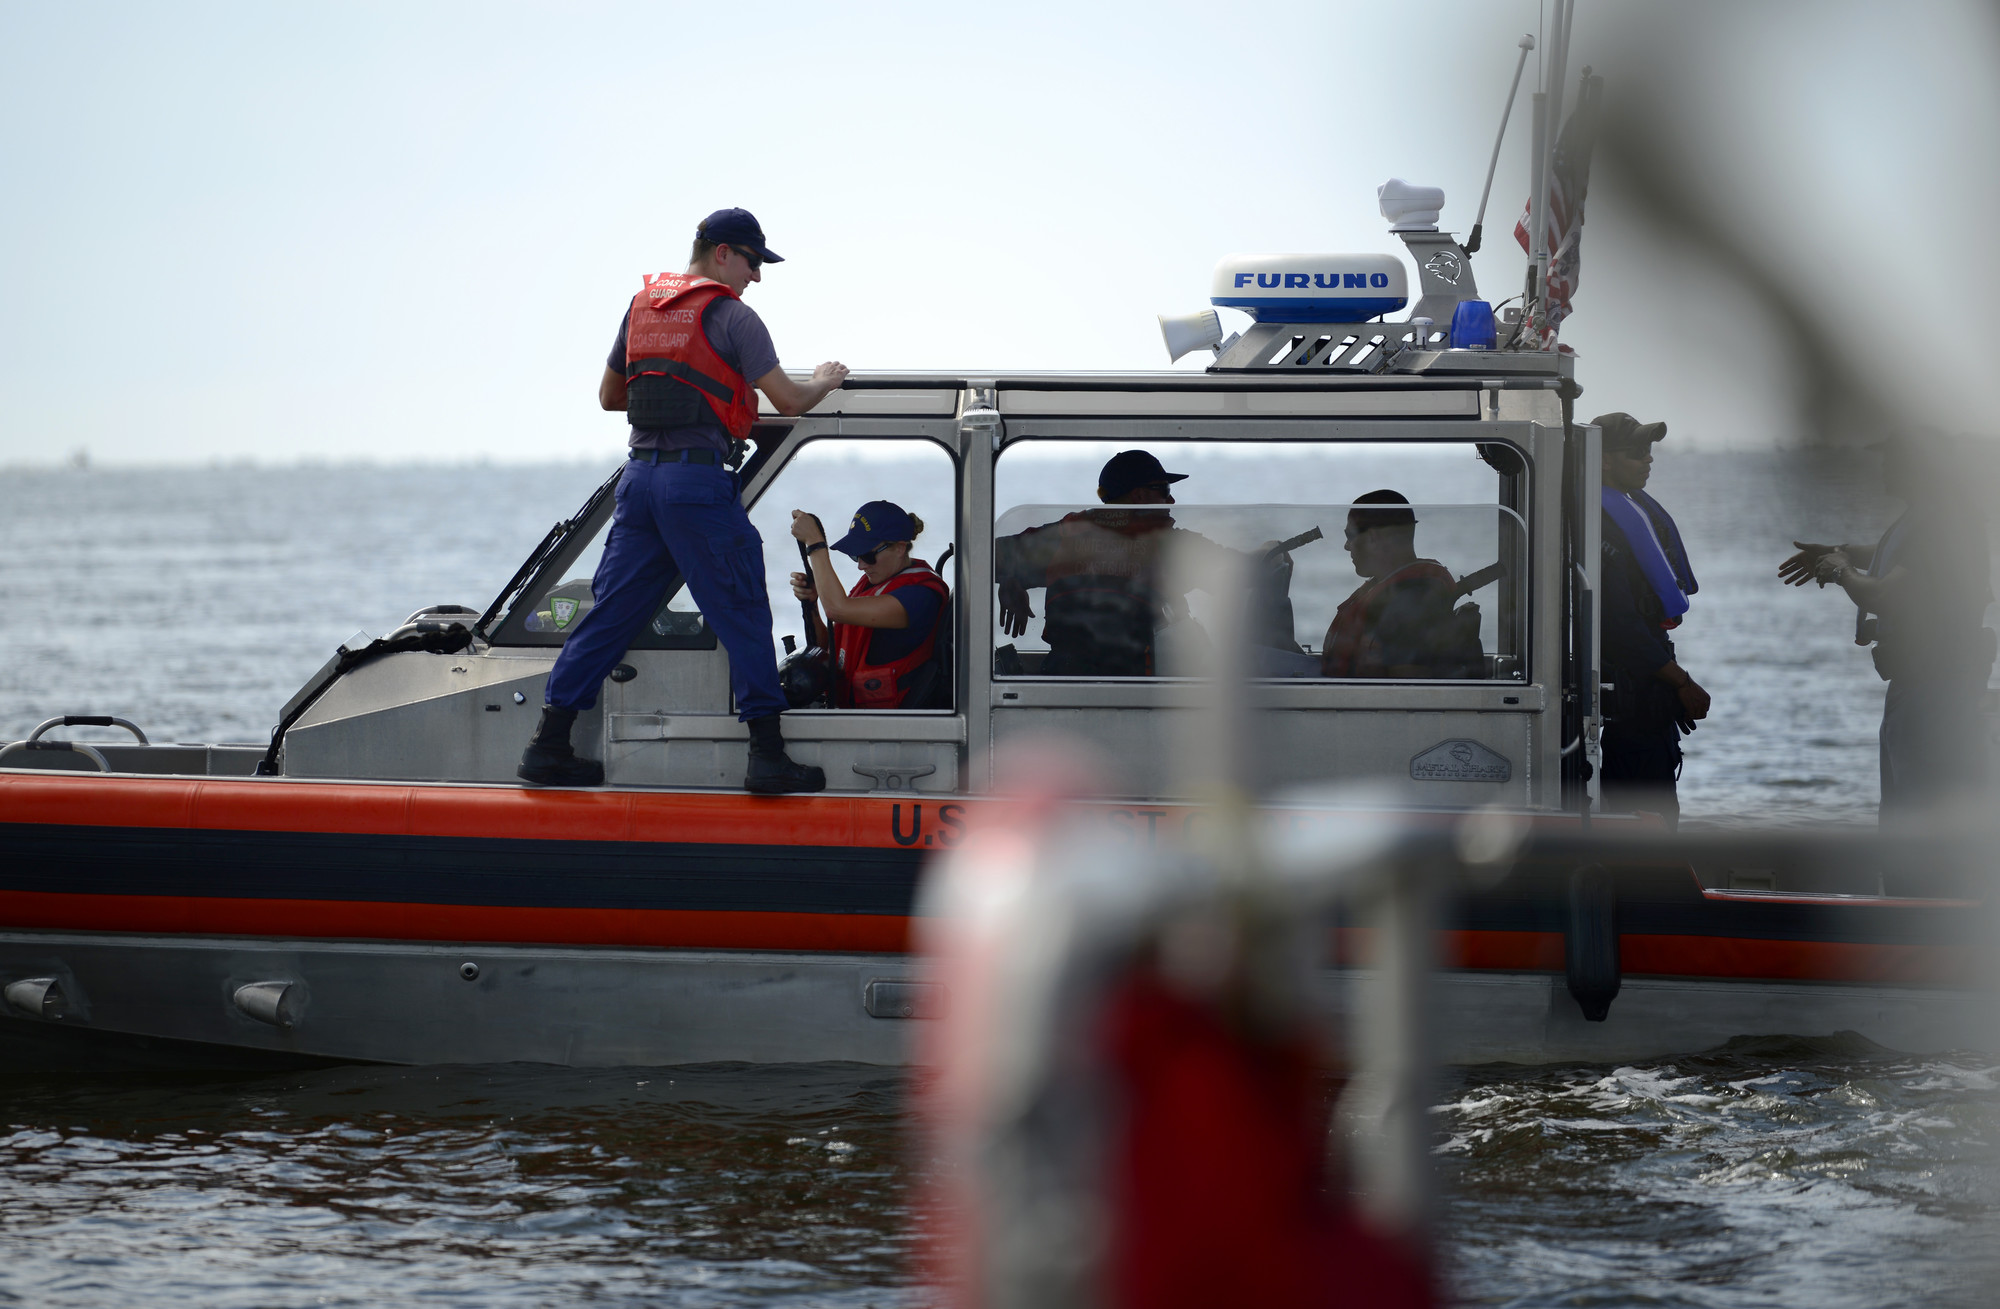 A U.S. Coast Guard response boat surveys the Charleston Harbor, S.C. Aug. 11, 2018, as part of Operation SHRIMP and GRITS, a multi-state and multi-jurisdiction maritime enforcement operation. The name stands for “Save Harbor Reach on Intelligence for Multi-state Partnerships and Guarding Responsible Interests for Target Safety.” There are approximately 86 different agencies and 400 people in the states of Florida, Georgia and South Carolina that are participating in the operation with the U.S. Coast Guard. (U.S. Air Force photo by Senior Airman Tenley Long) 